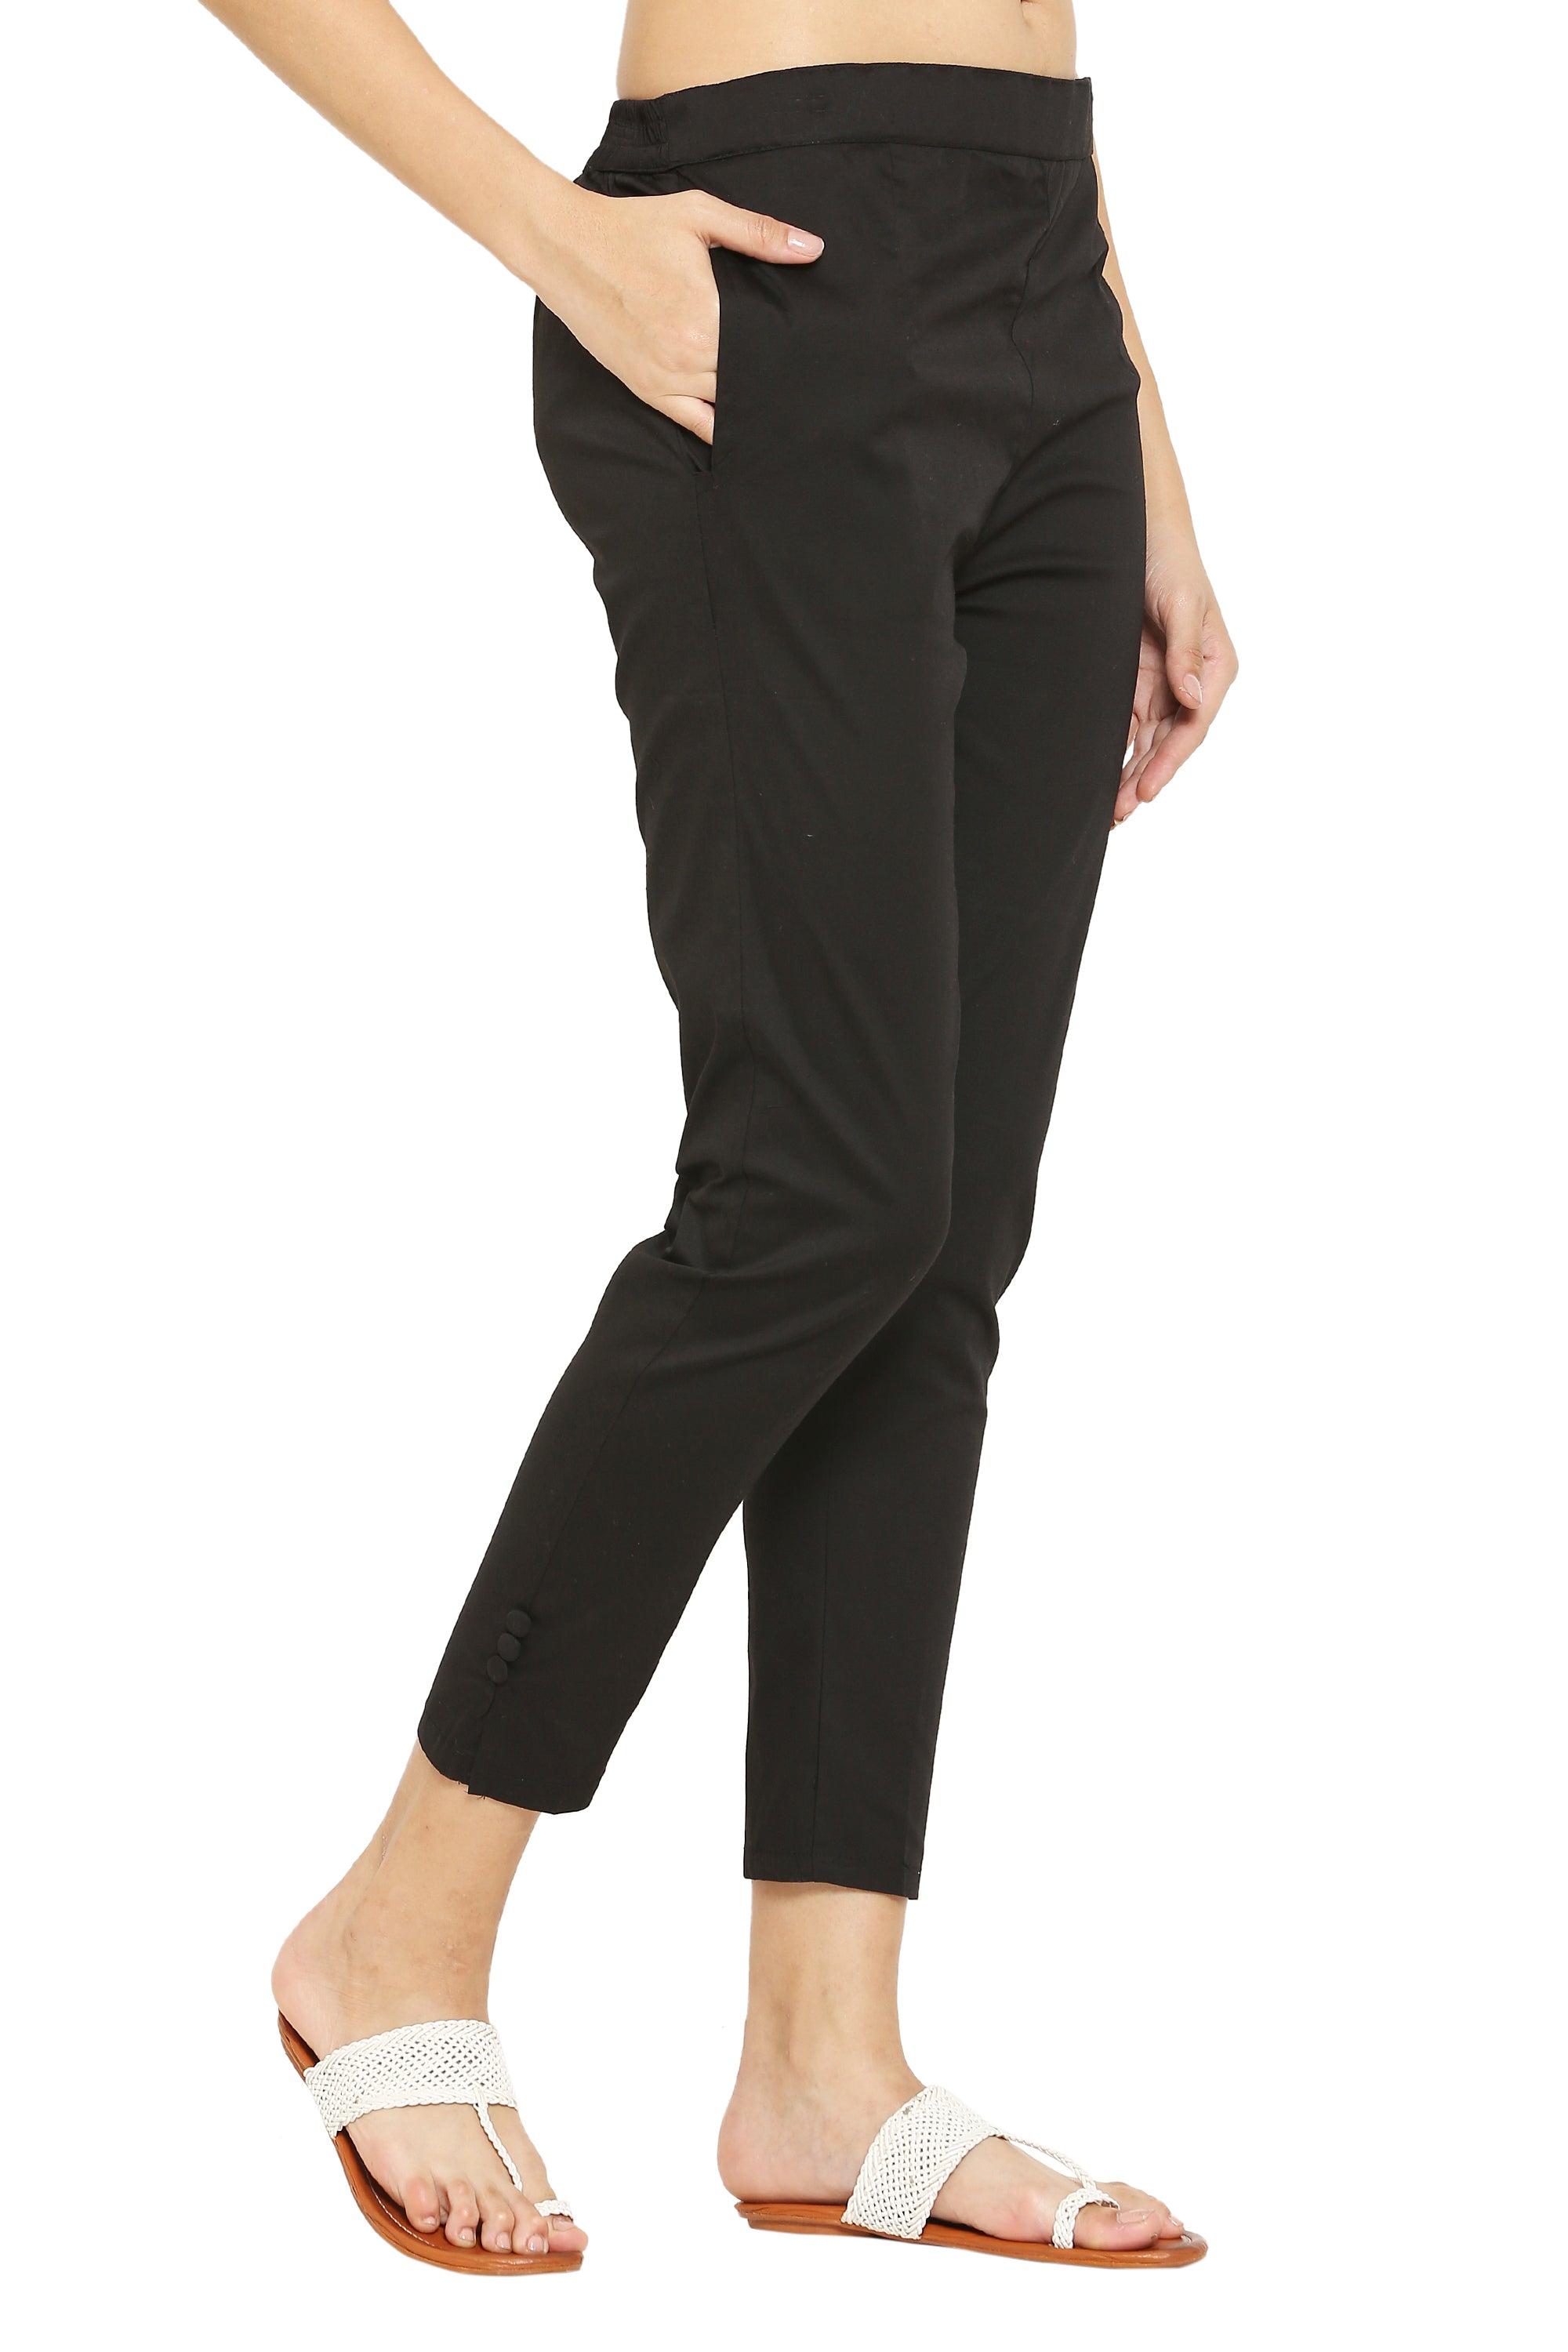 RIVIK Lower 3 Track Pant - Dryfit 4 Way Lycra Fabric Above 240 Gsm, For  Regular And Sports at Rs 320/piece in Delhi